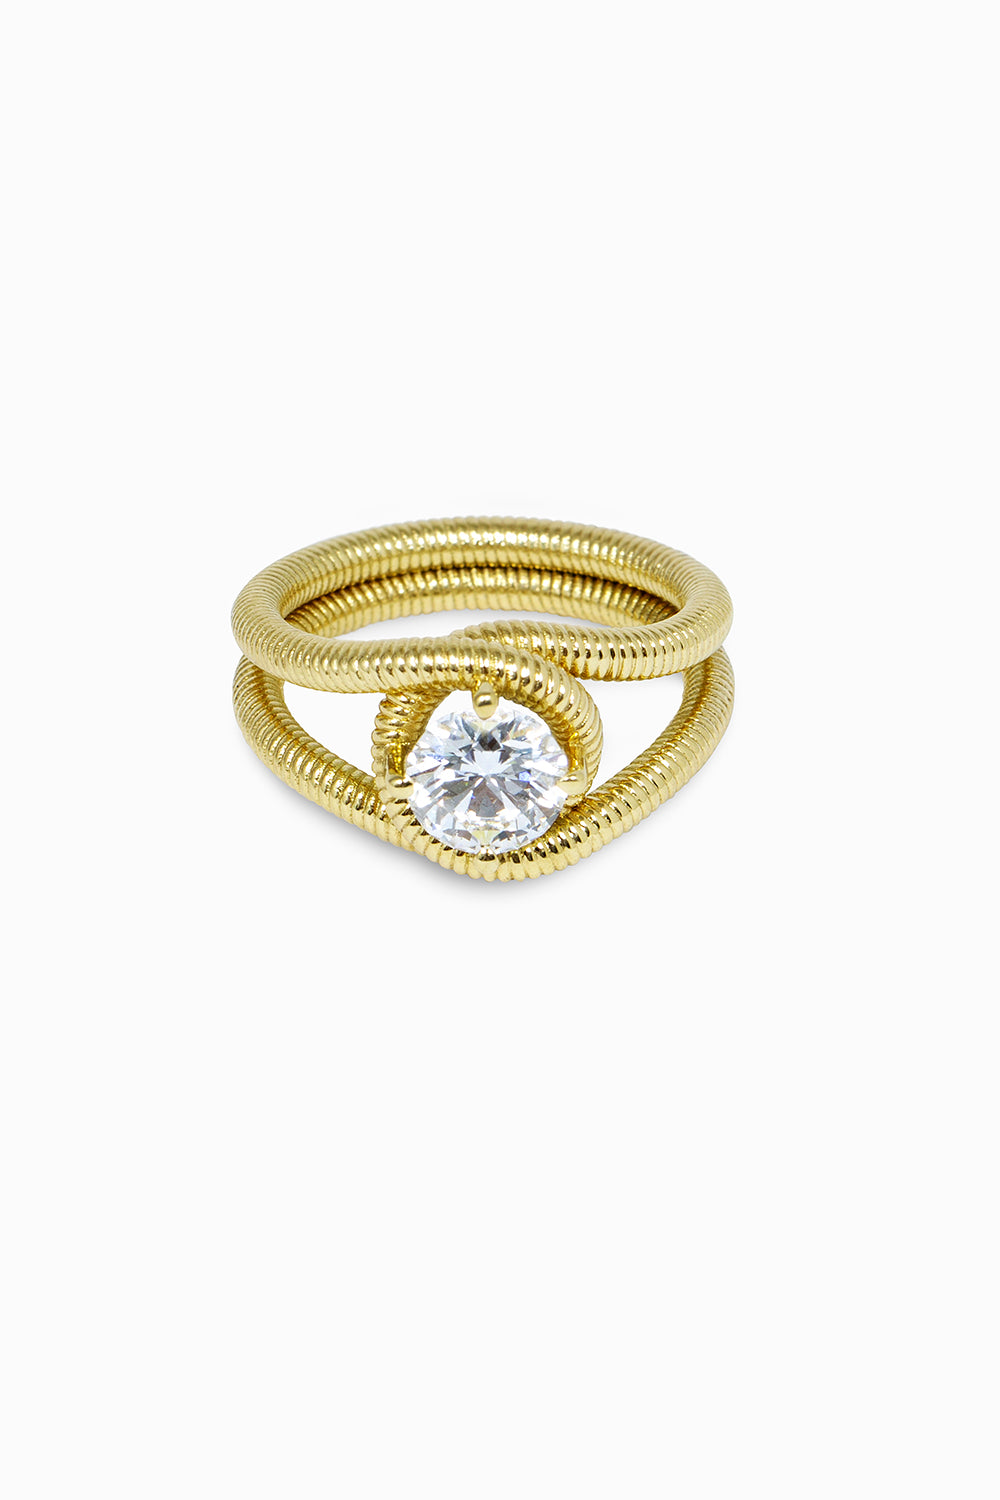 Hug solitaire ring